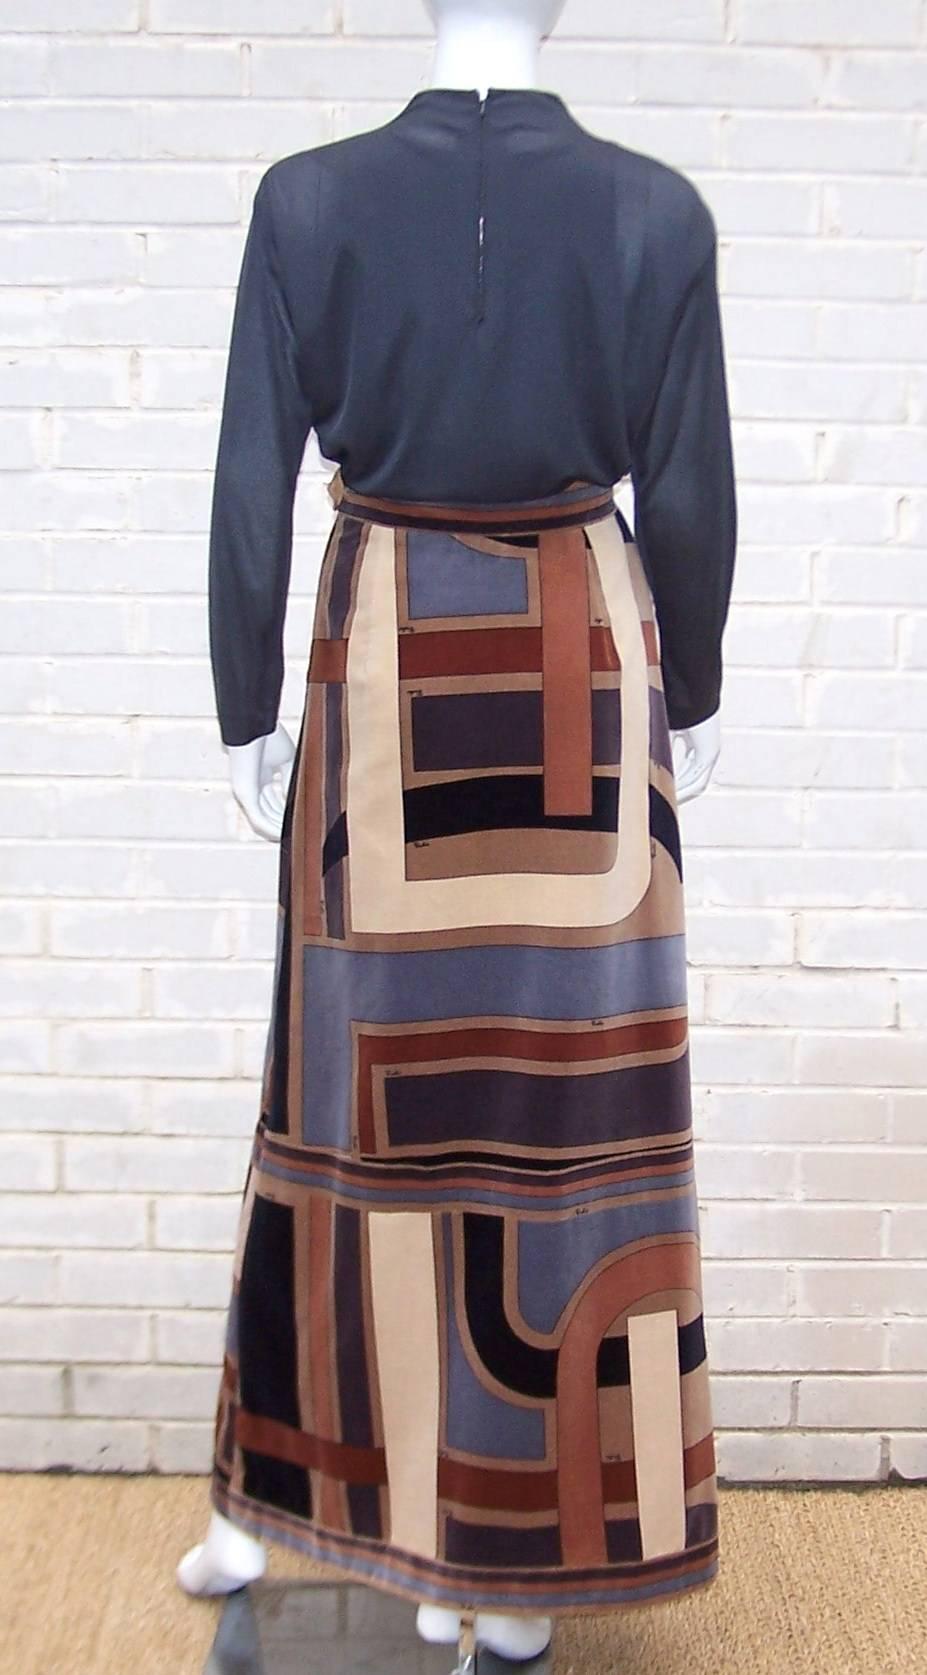 Love this period perfect mod ensemble from the king of the psychedelic prints, Emilio Pucci.  As always with Pucci, the star of the show is the fabric design ... graphic intersecting lines in grays, black and various shades of brown.  The maxi skirt